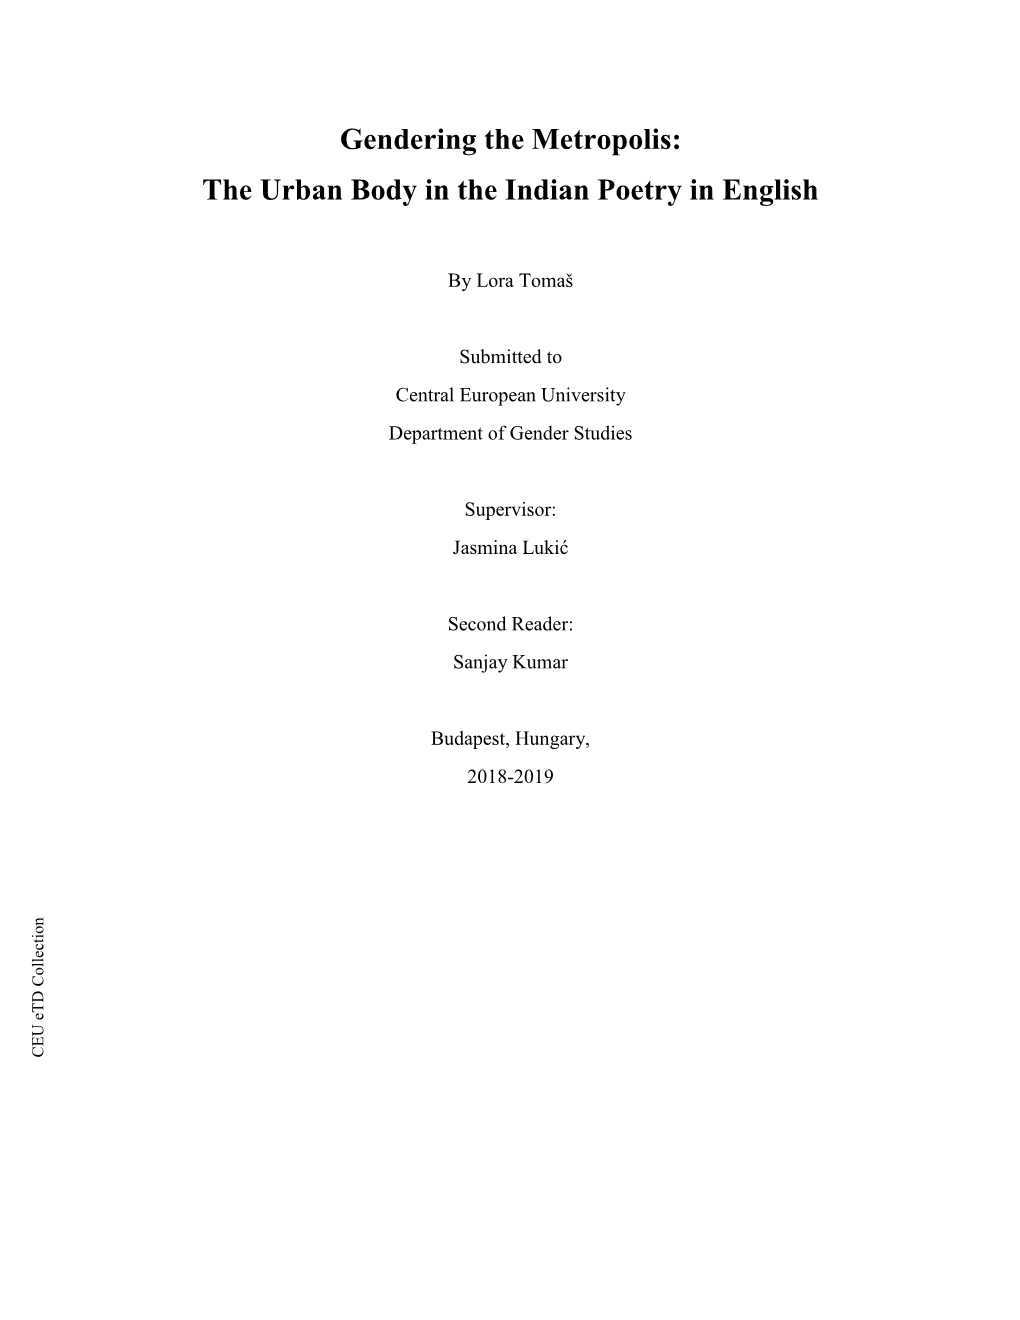 The Urban Body in the Indian Poetry in English